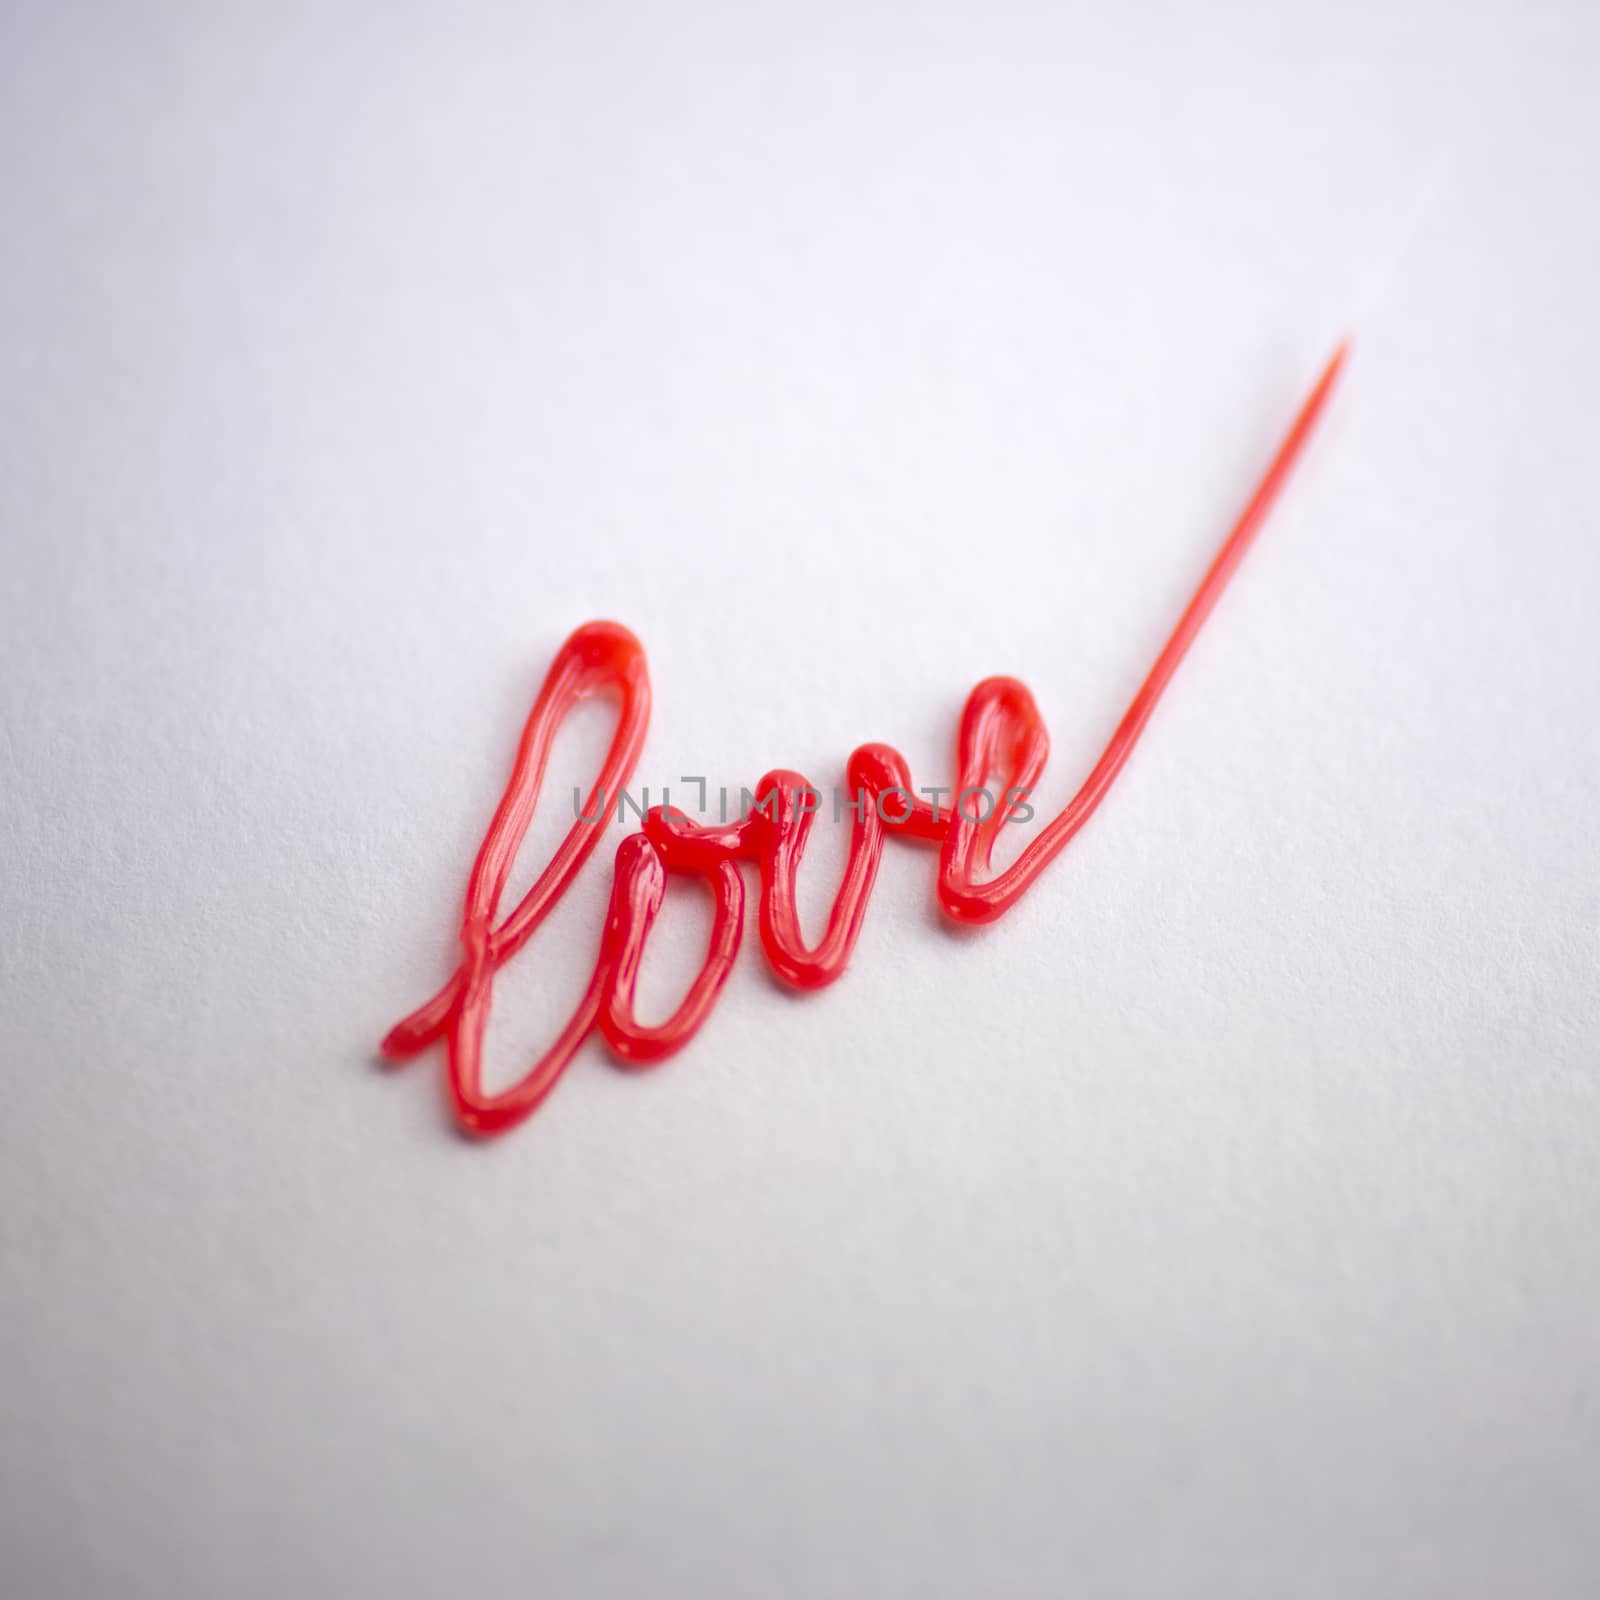 red the writing love drawn by 3d pen by butenkow